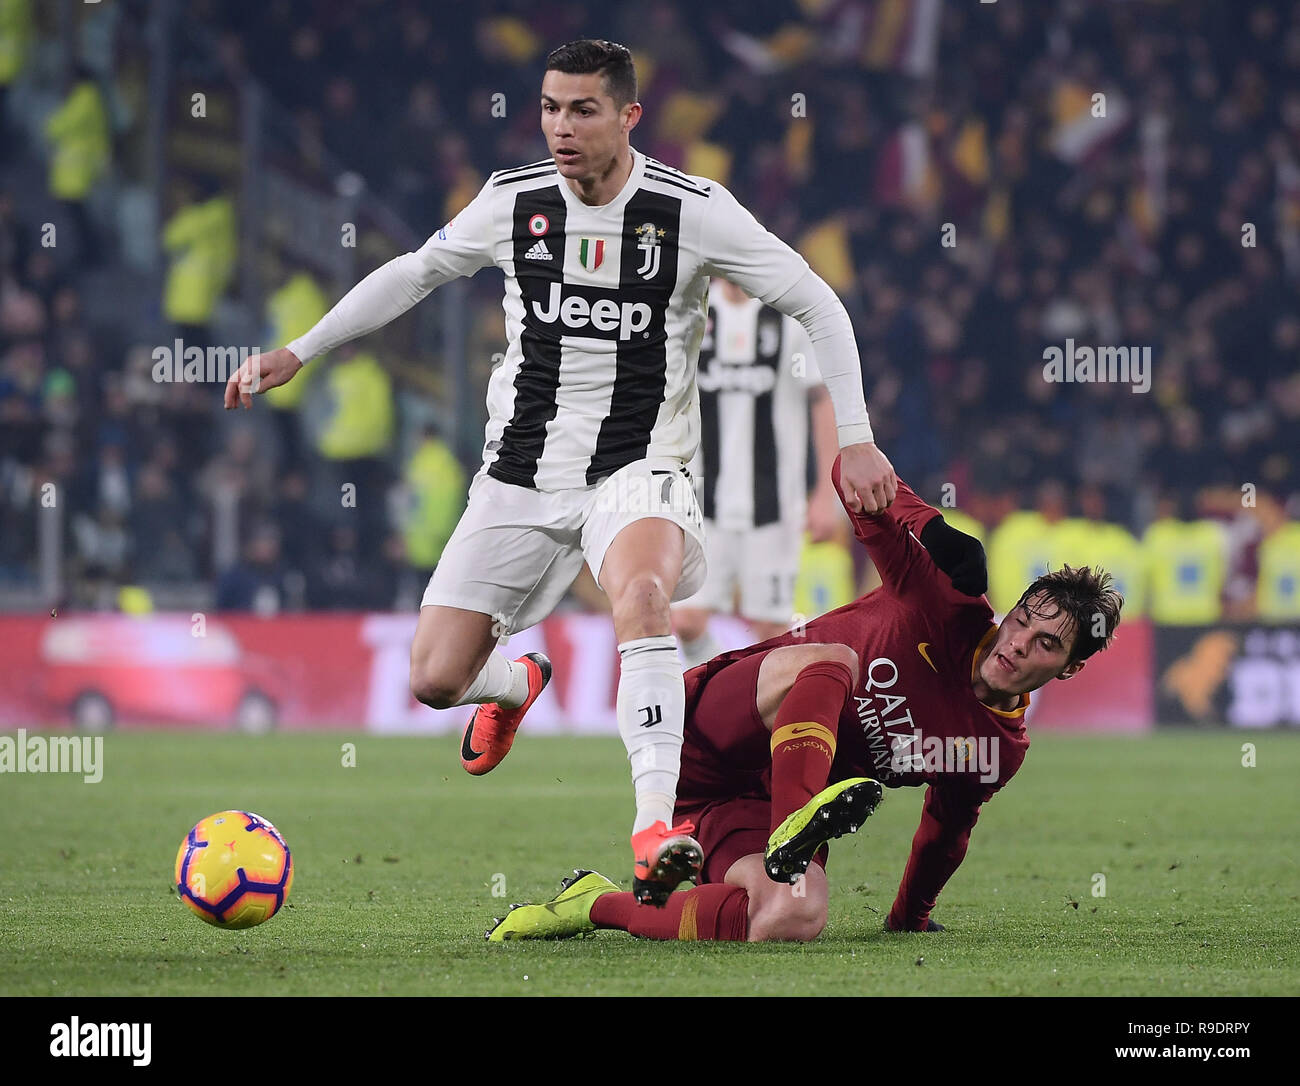 Turin, Italy. 22nd Dec, 2018. football, Serie A TIM championship